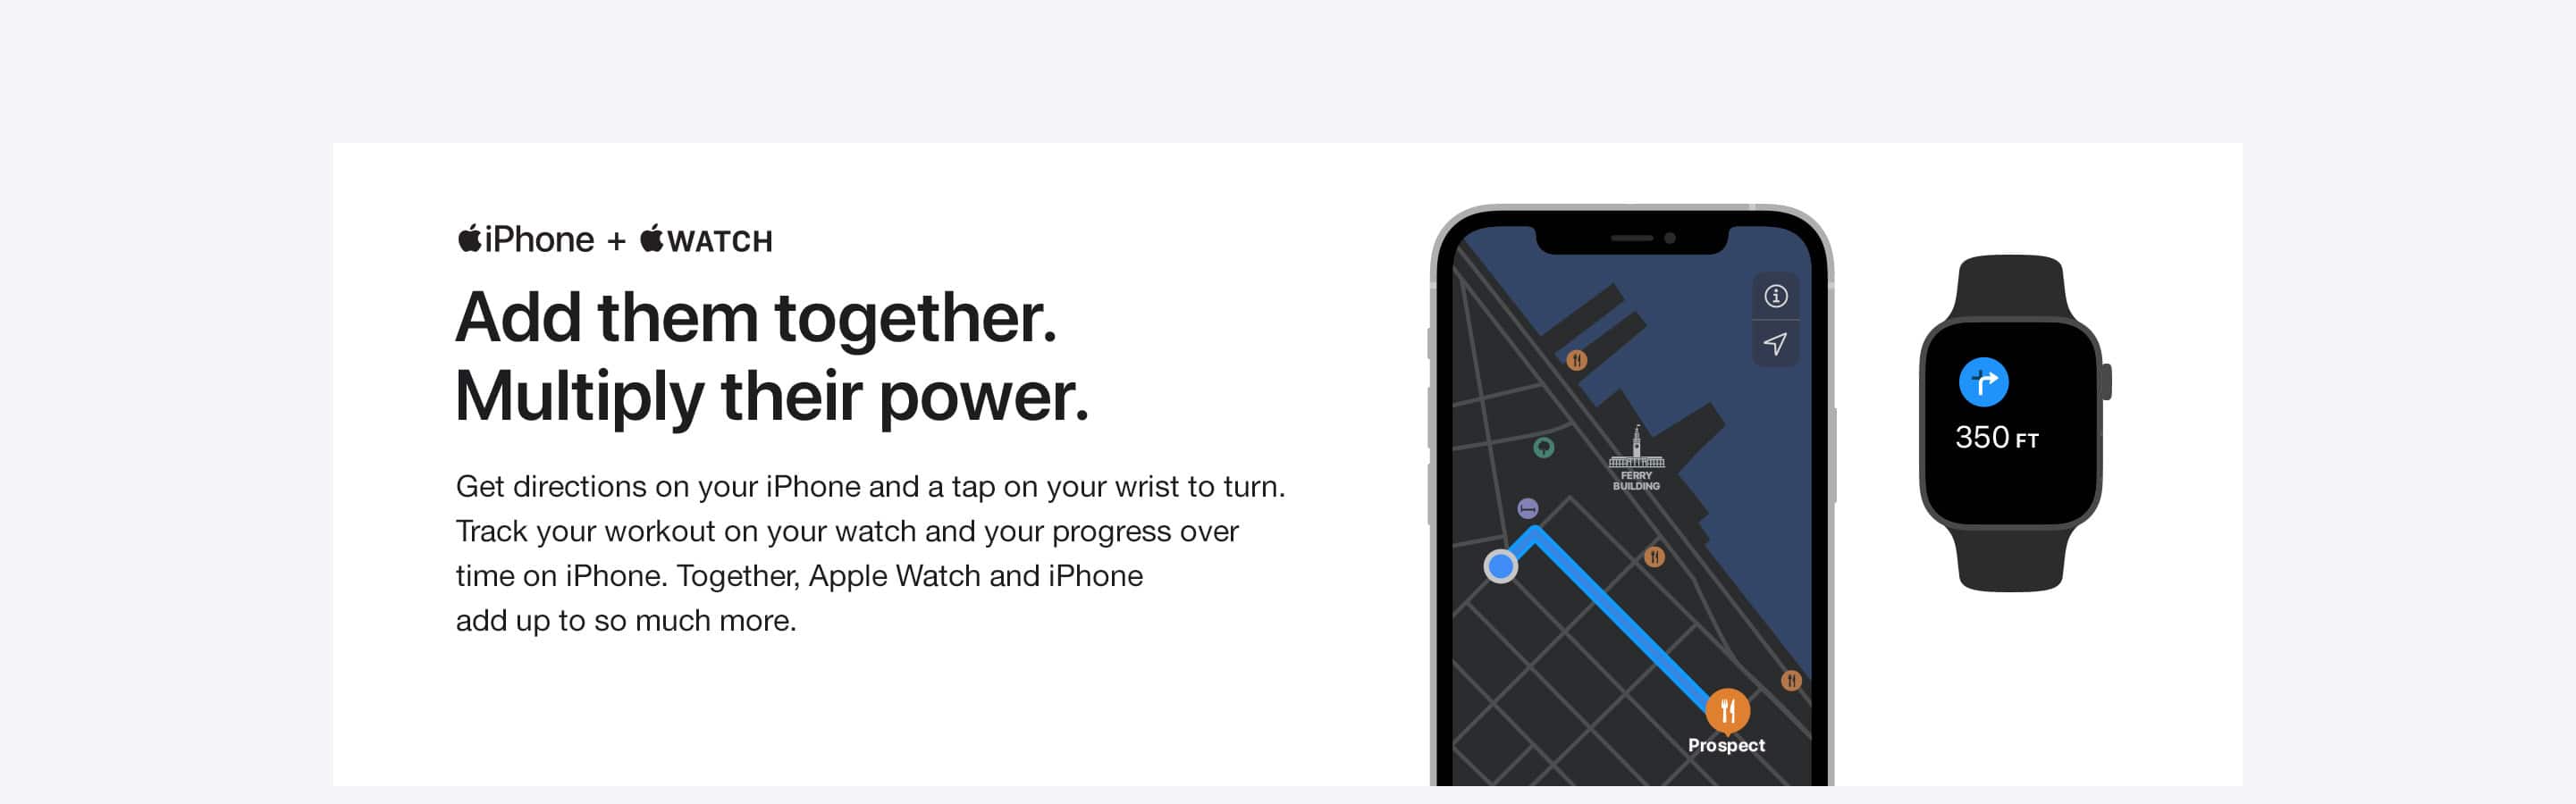 iPhone + WATCH. Add them together. Multiply their power. Get directions on your iPhone and a tap on your wrist to turn. Track your workout on your watch and your progress over time on iPhone. Together, Apple Watch and iPhone add up to so much more.